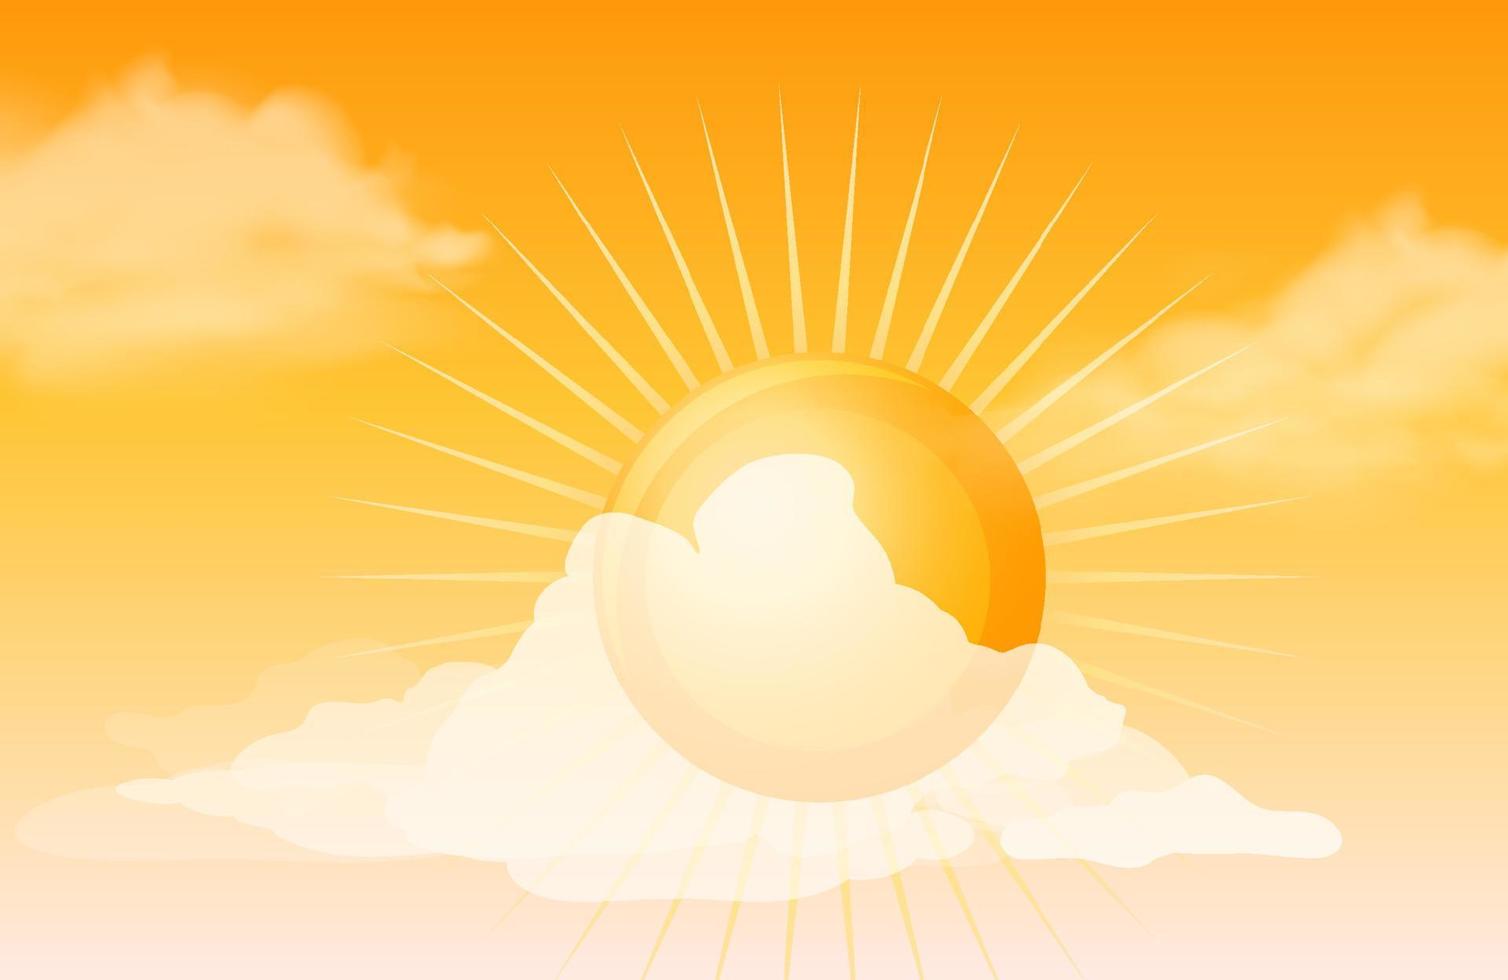 Clouds and sun in yellow sky vector